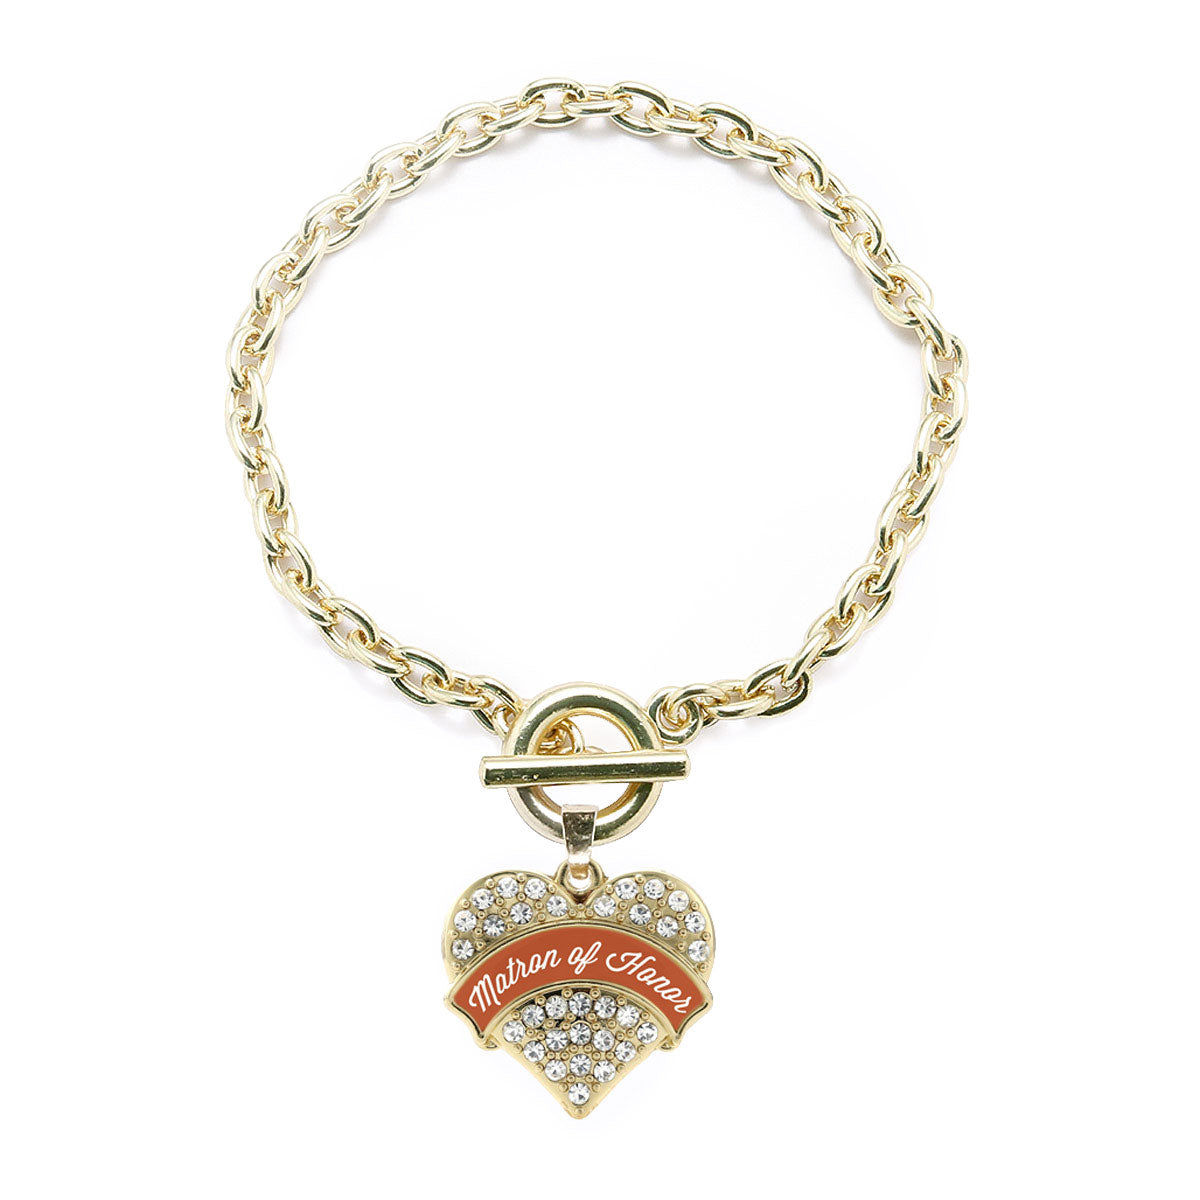 Gold Rust Matron of Honor Pave Heart Charm Toggle Bracelet